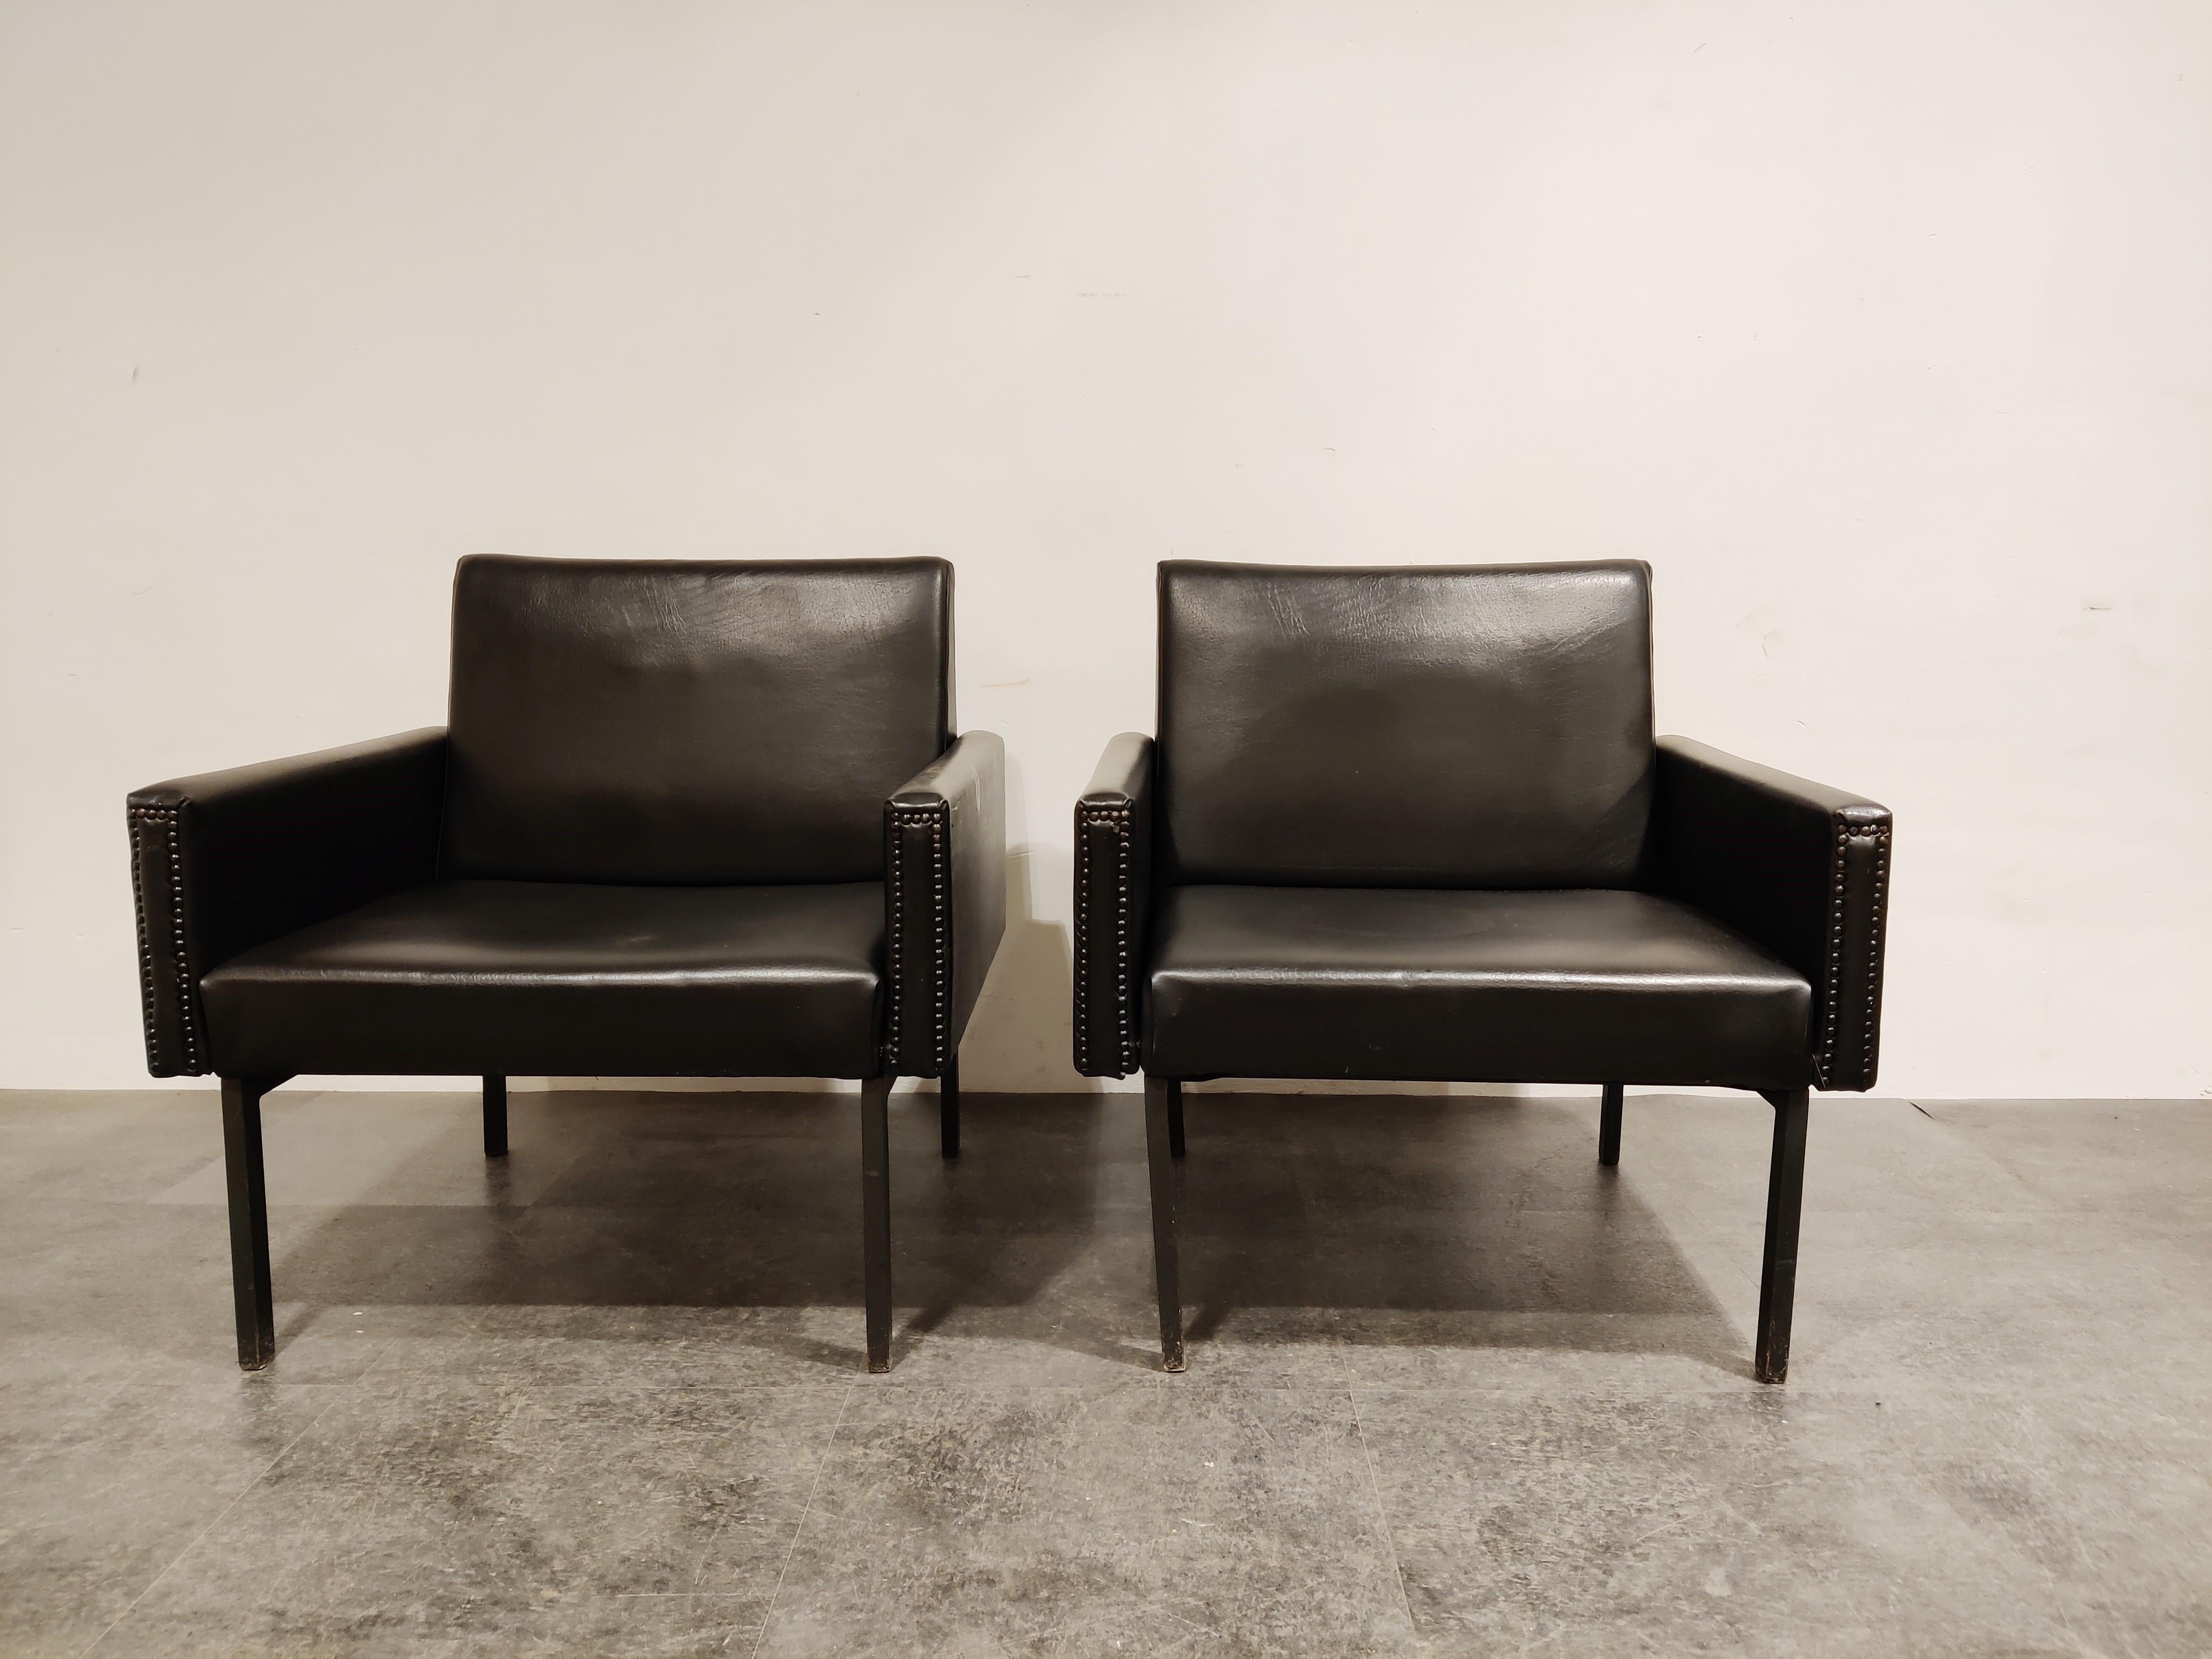 Pair of midcentury armchairs by Wilkhan from the 1960s.

Black steel legs and original black leatherette upholstery with buttoned front.

The chairs are in overall good condition with normal age related wear.

Height: 77cm/27.55
Seat height: